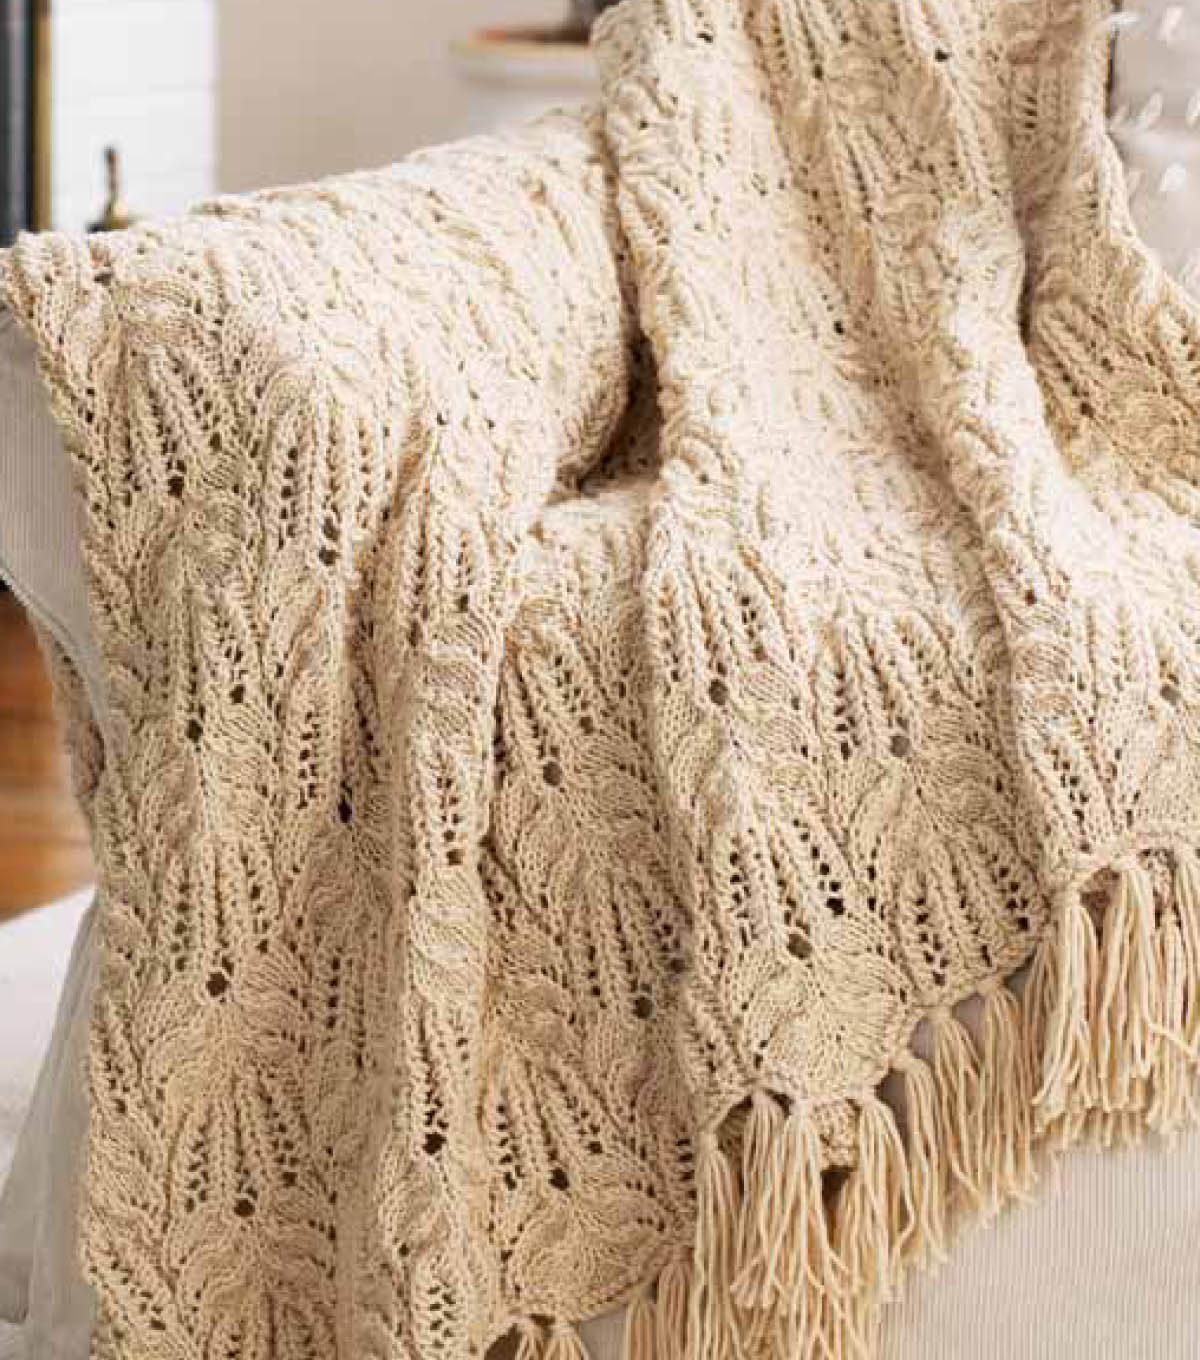 Knitting Afghan Patterns Free Free Knitting Pattern Lace And Cable Afghan